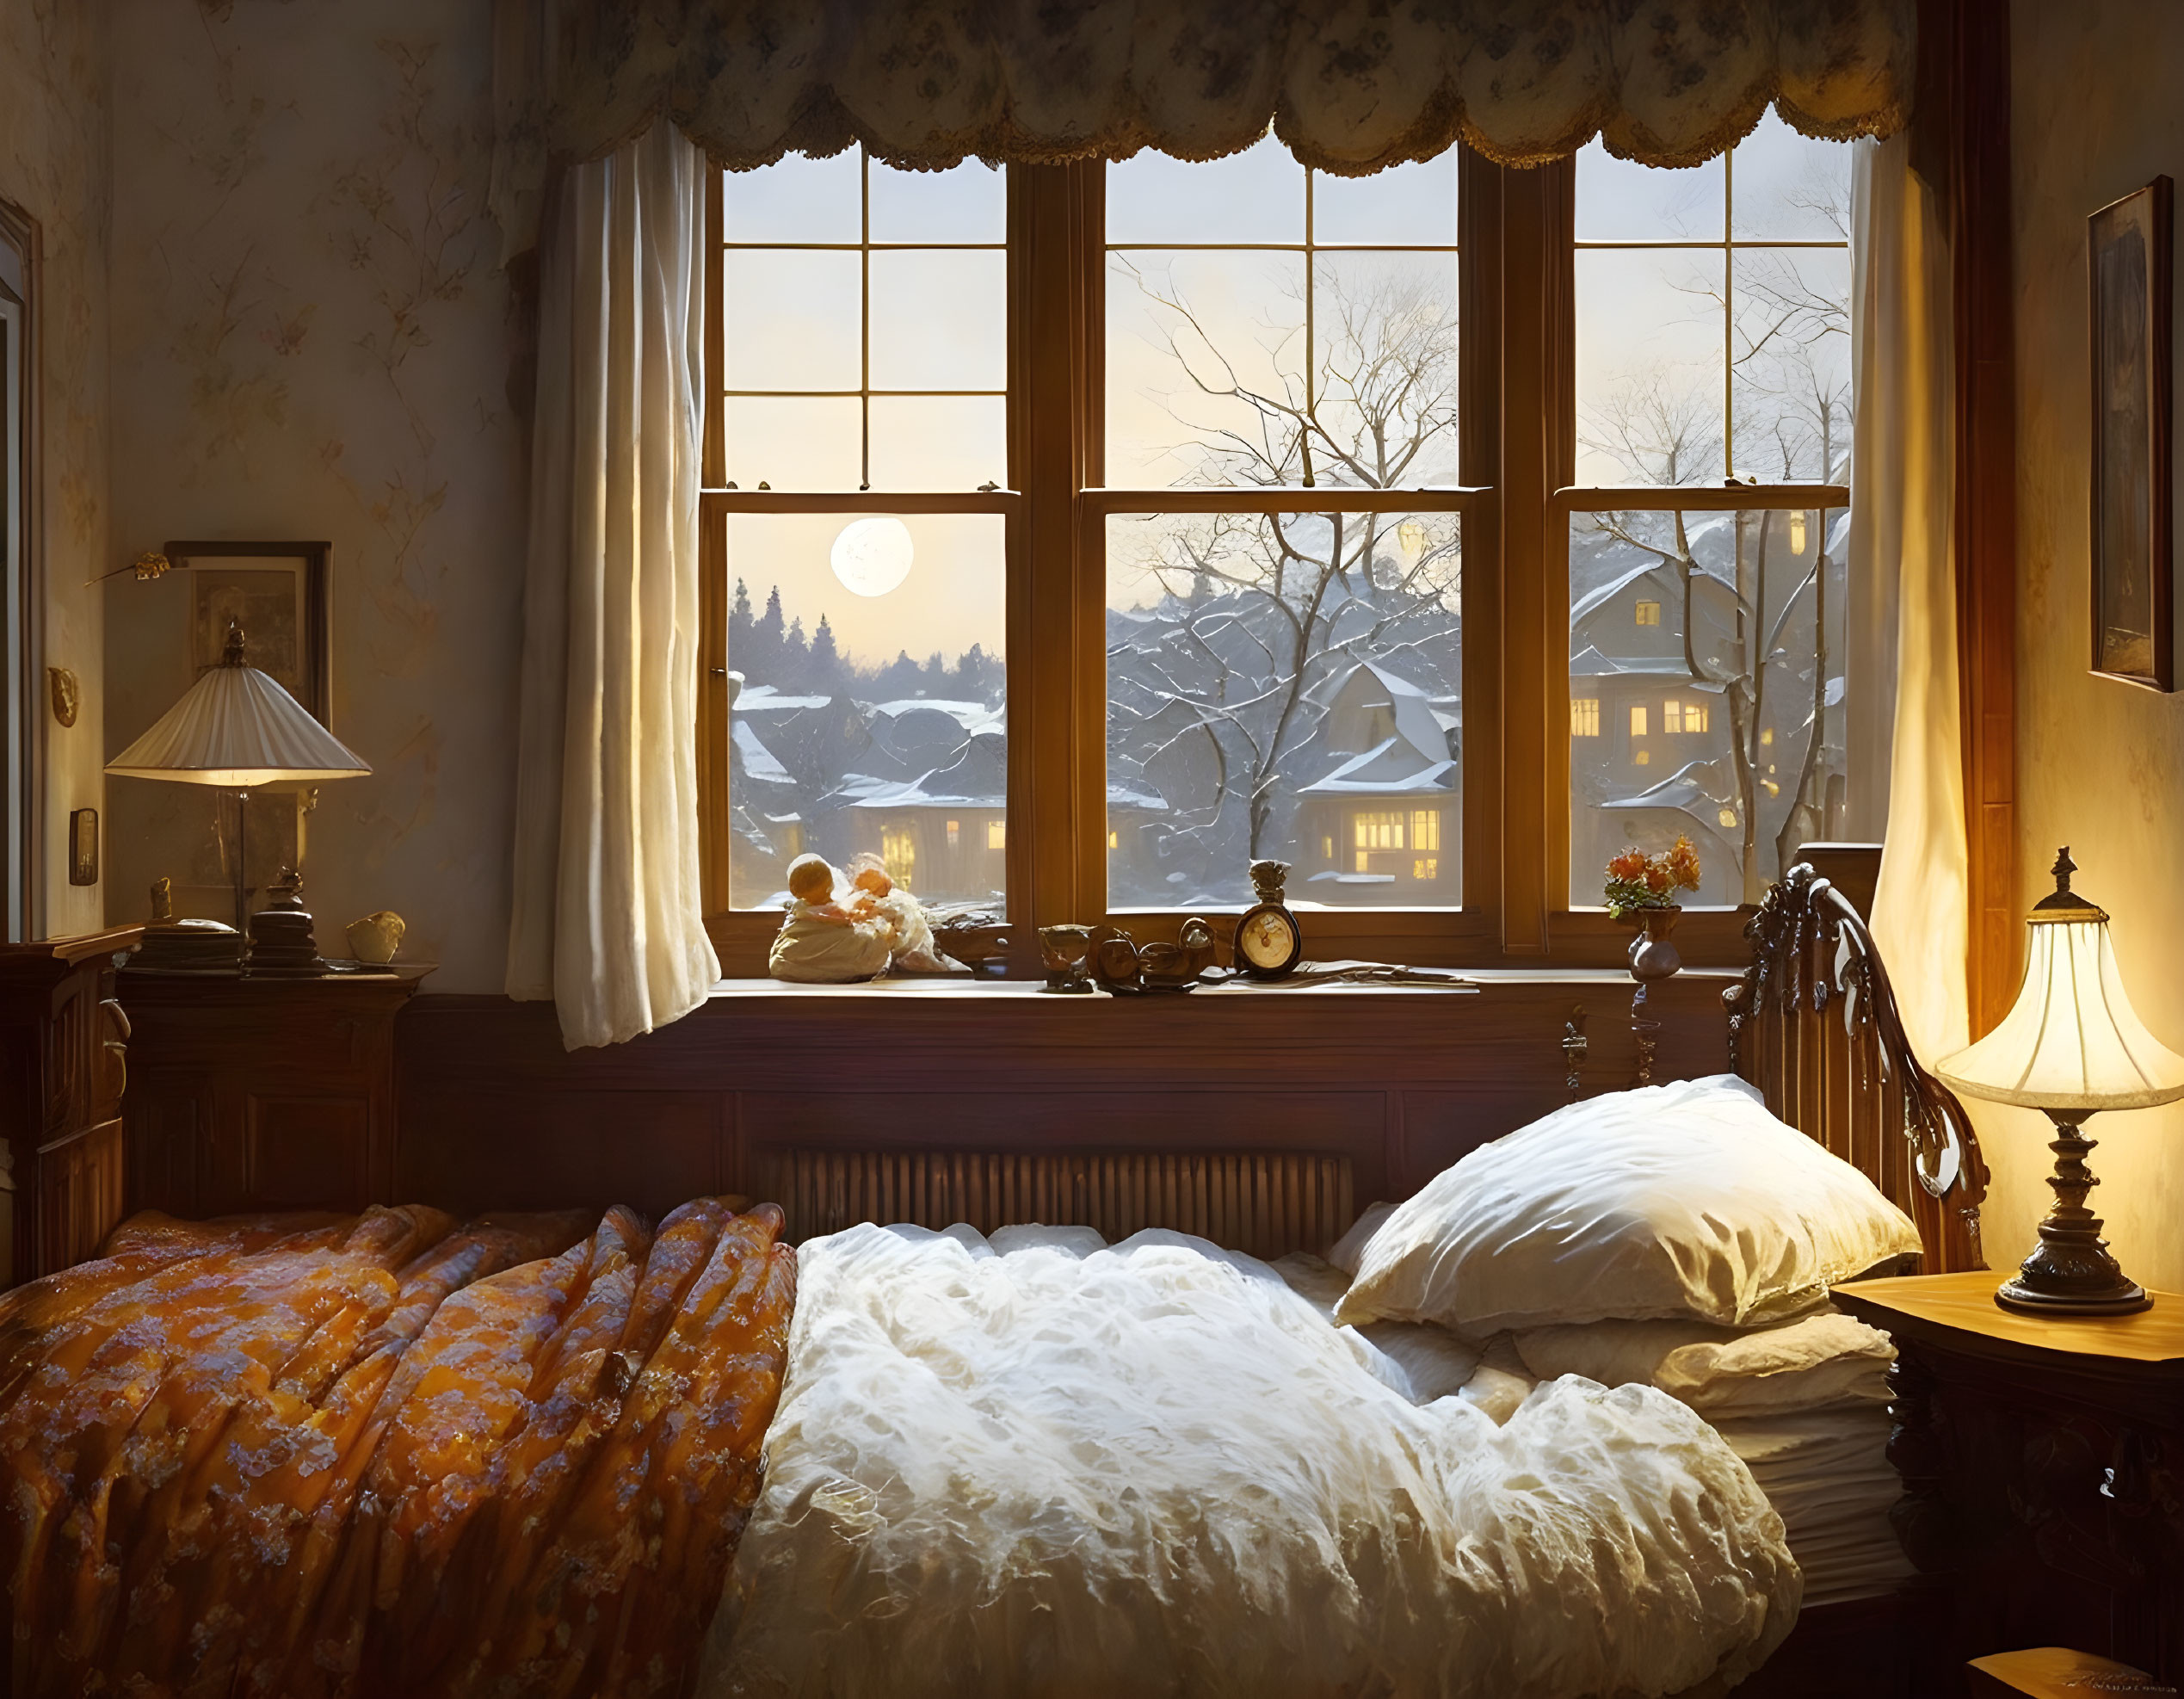 Cozy bedroom at dusk with made bed, glowing lamps, snowy neighborhood view, full moon